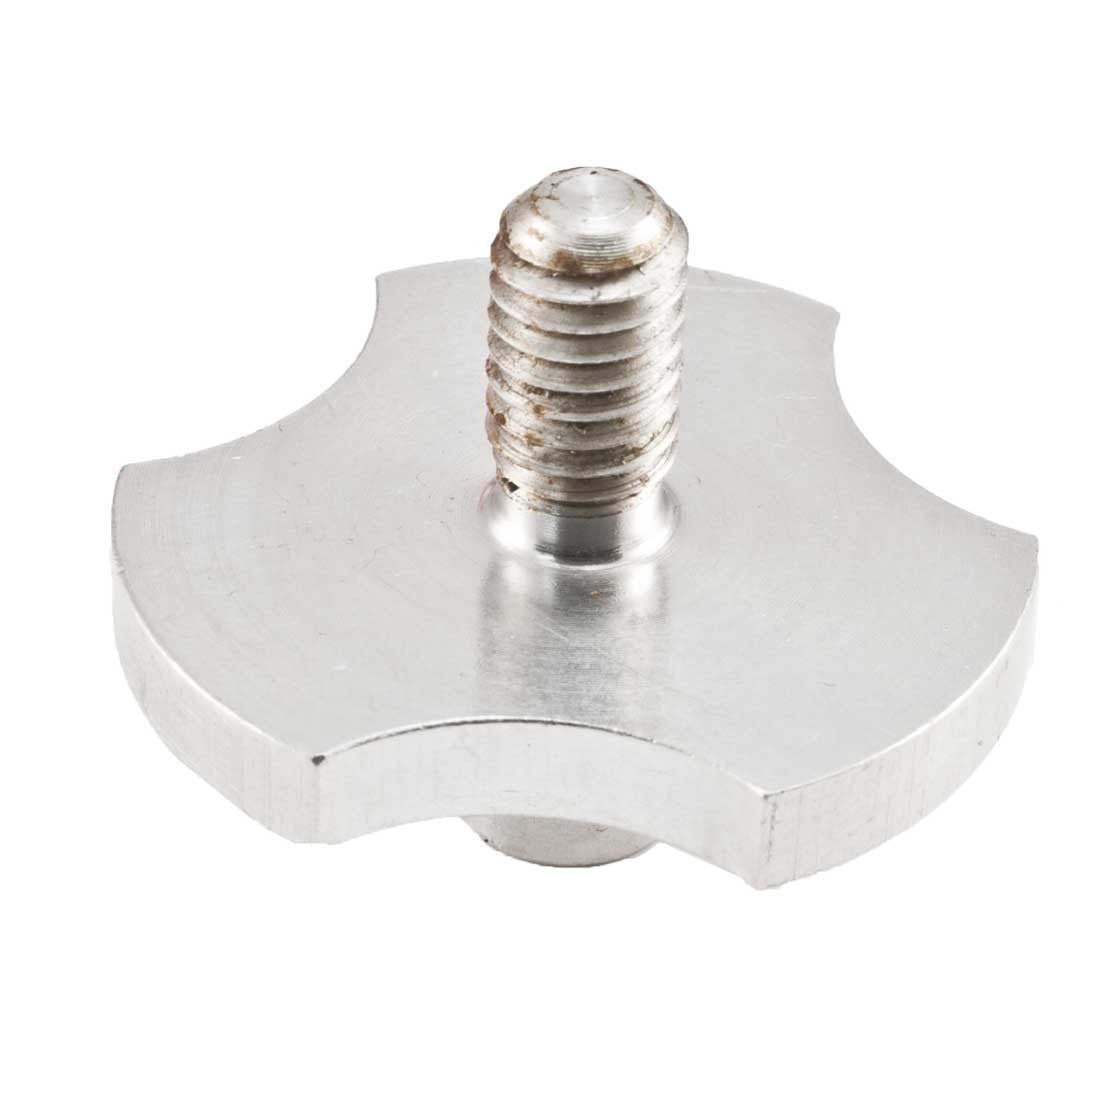 Large Aluminum Die Holder to fit BB Press(MADE USA)